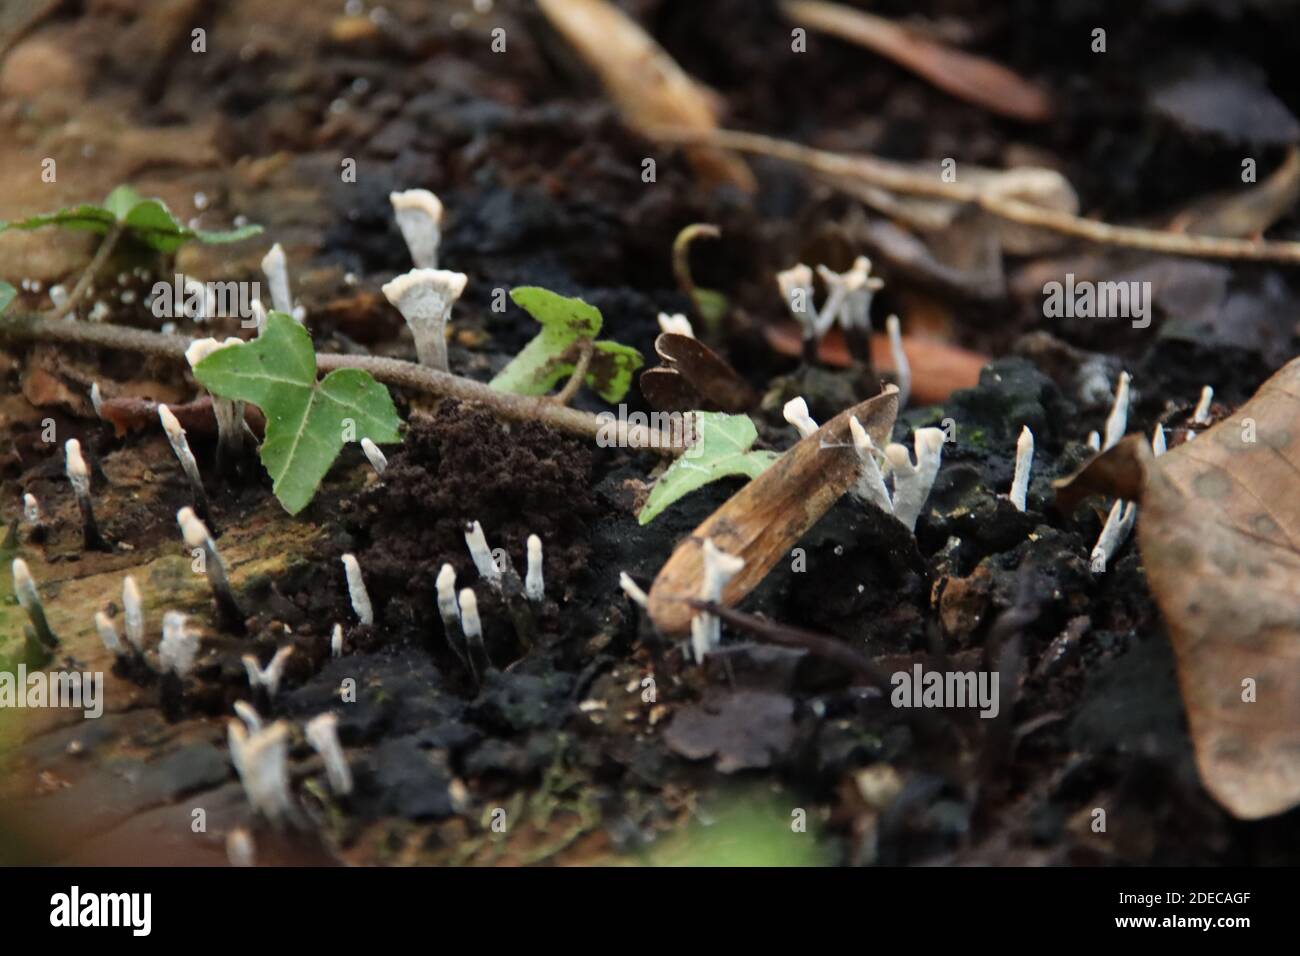 Xylaria hypoxylon is a species of fungus in the genus Xylaria. It is known by a variety of common names, such as the candlestick fungus, the candlesnu Stock Photo